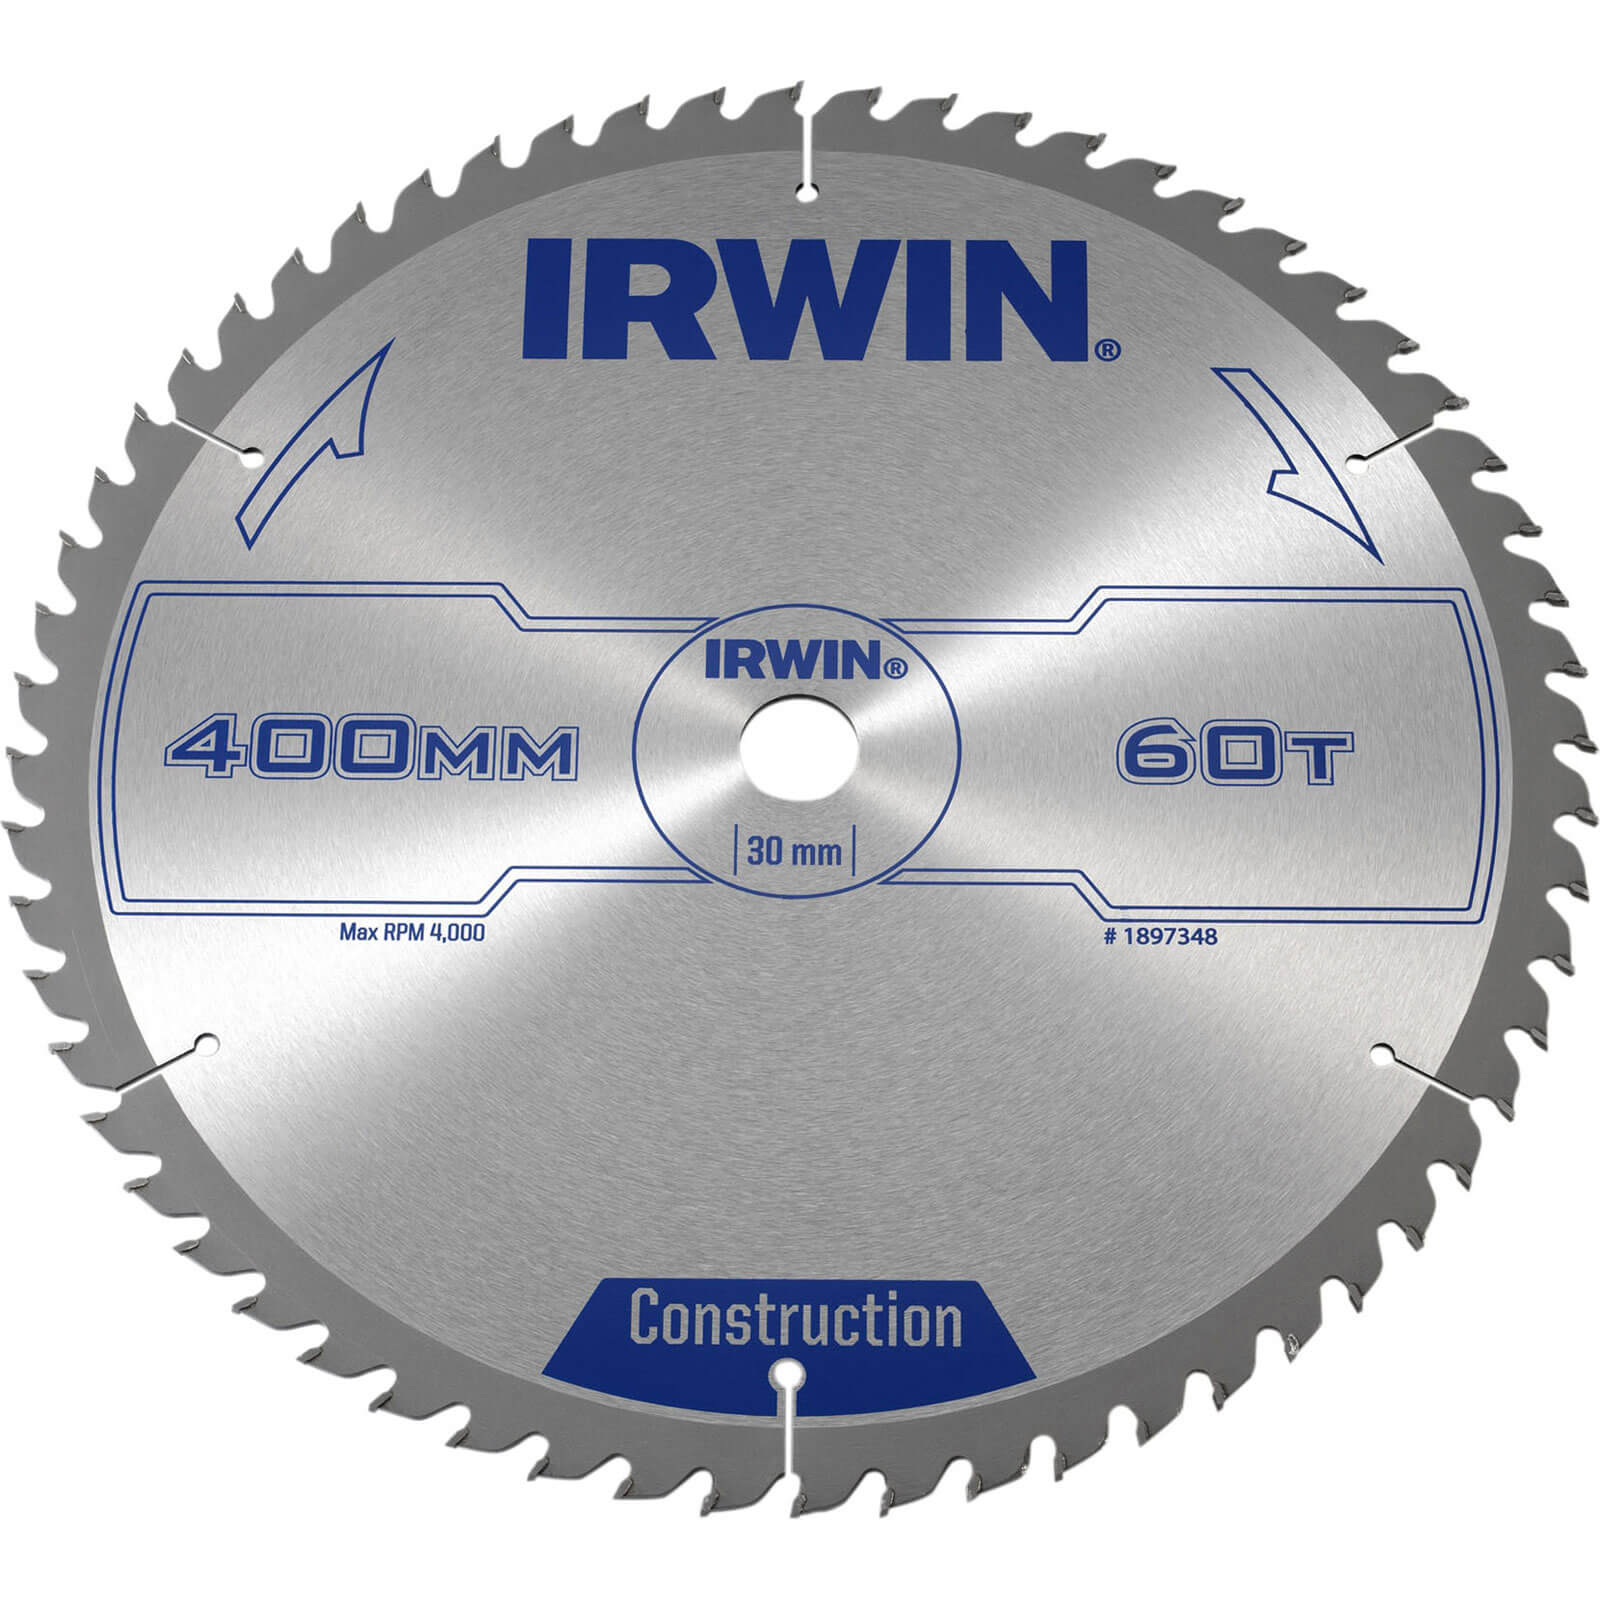 Photo of Irwin Atb Construction Circular Saw Blade 400mm 60t 30mm